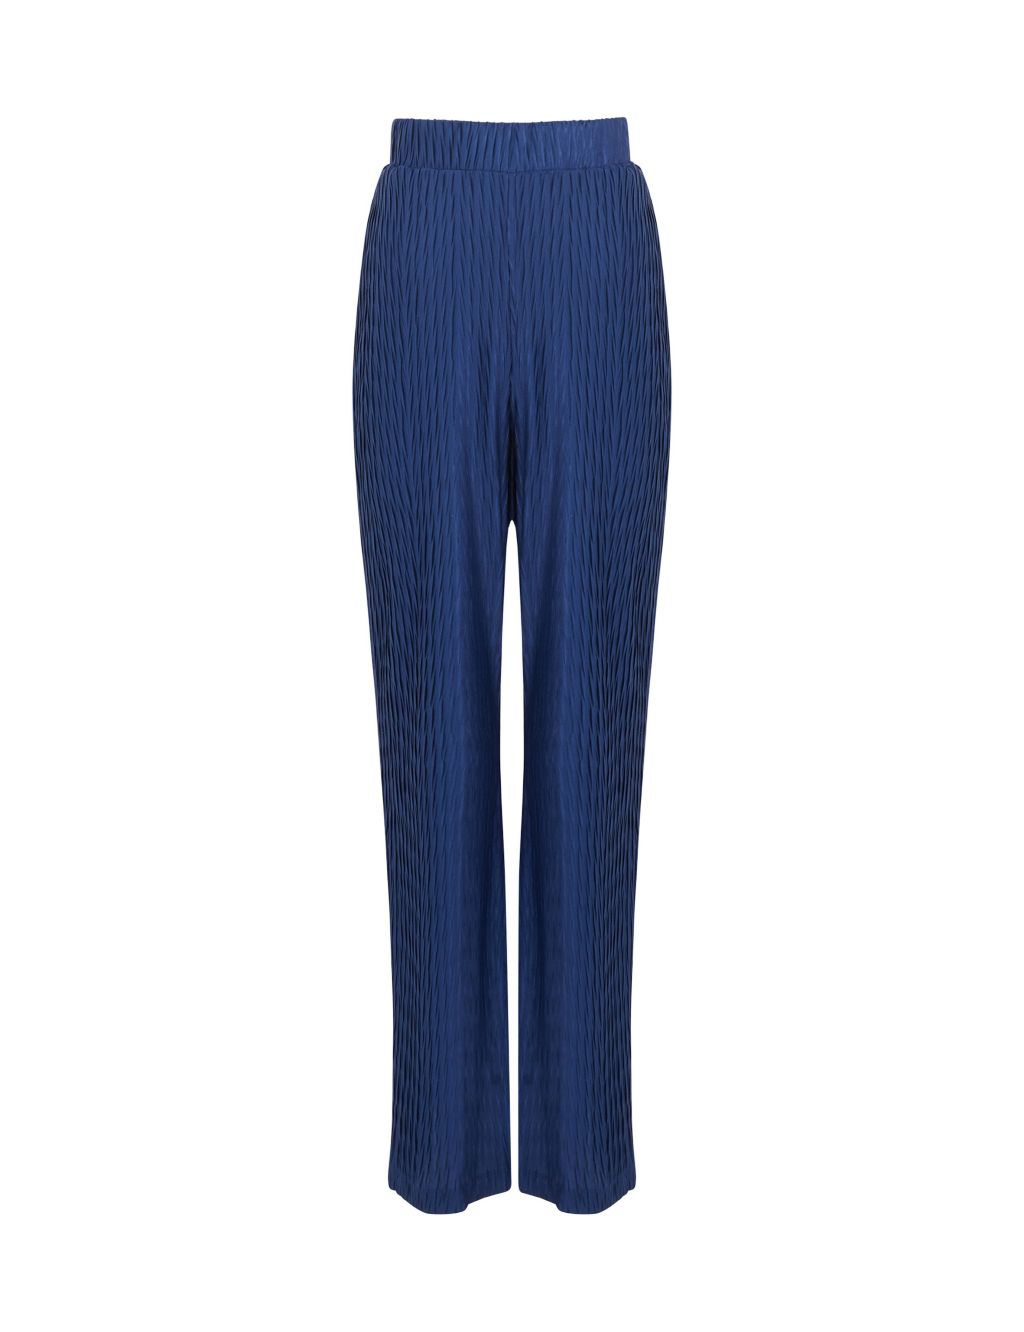 Textured Straight Leg Flared Trousers image 2